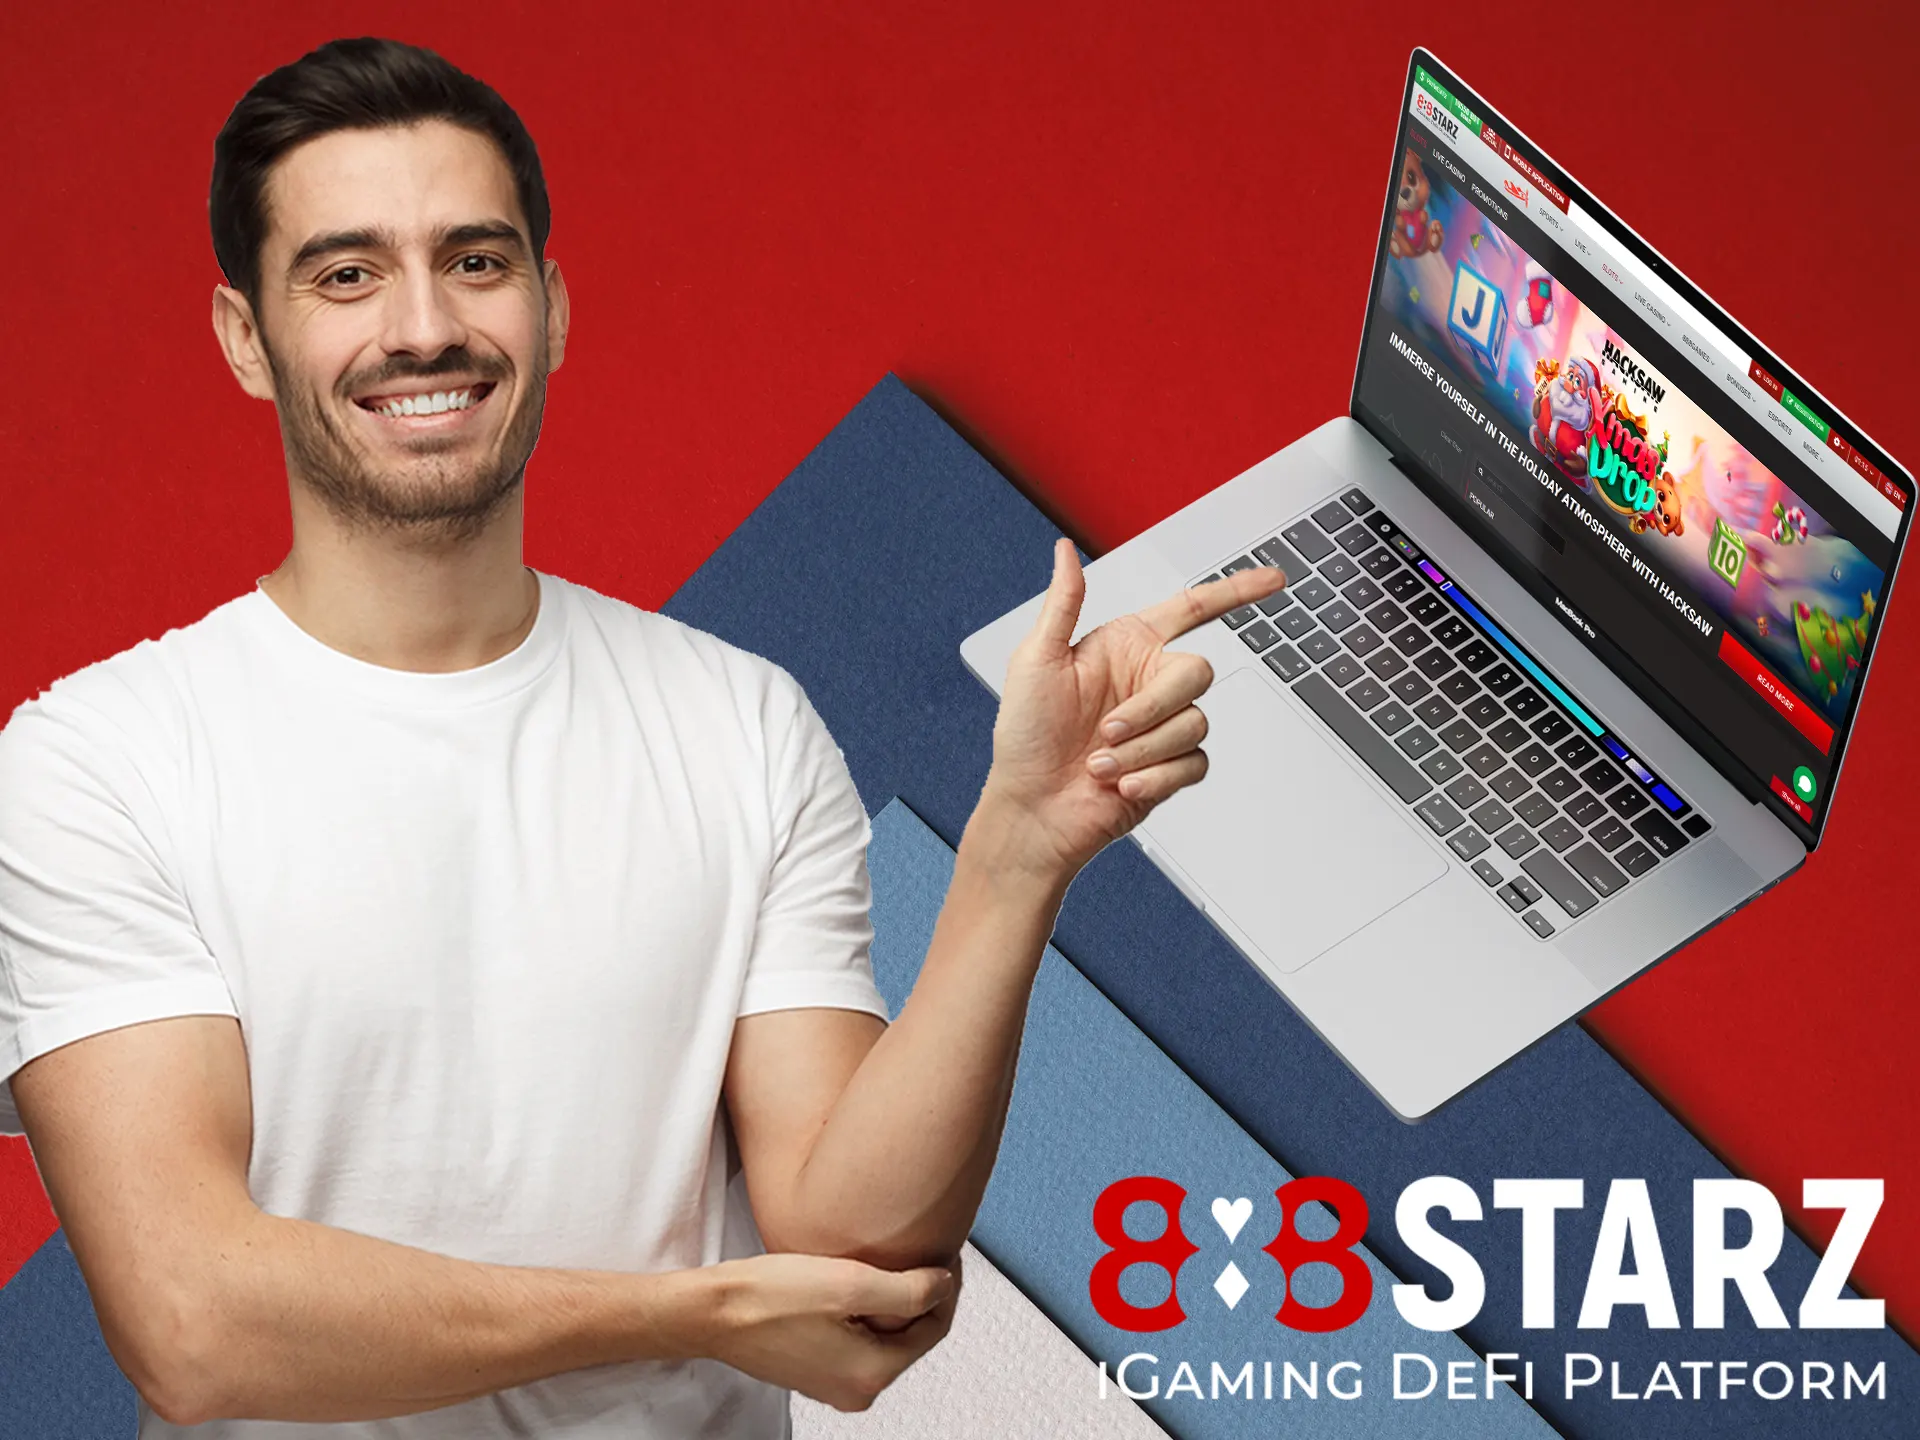 In this review you got acquainted with 888starz casino and now you know who to favor in gambling.